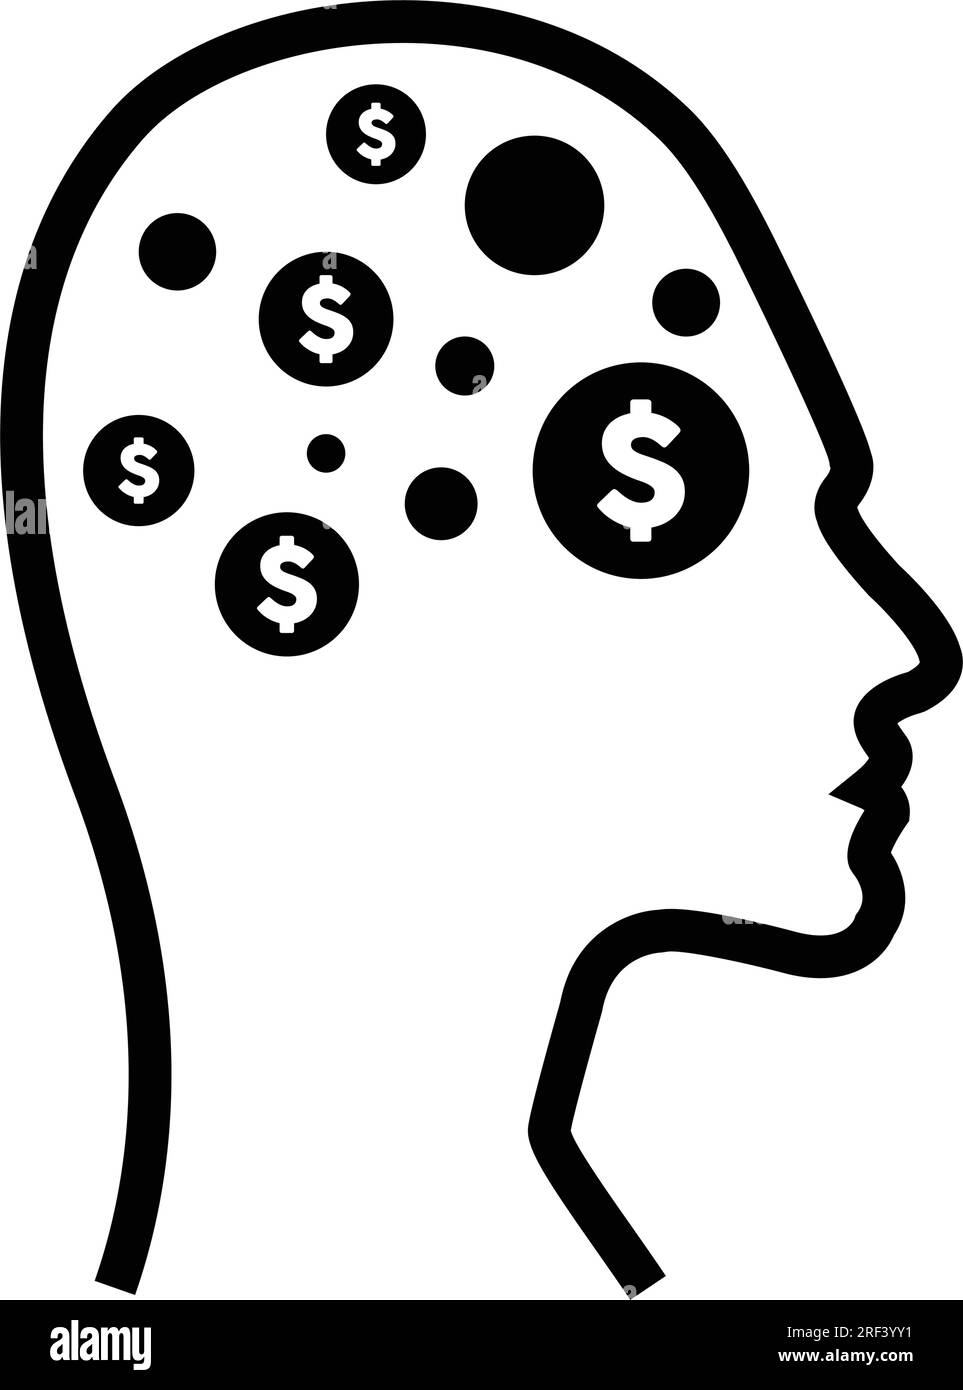 A dollar sign icon on a human profile face with a brain chip implant for Artificial Intelligence finance illustration in glyph pictograms. Stock Vector